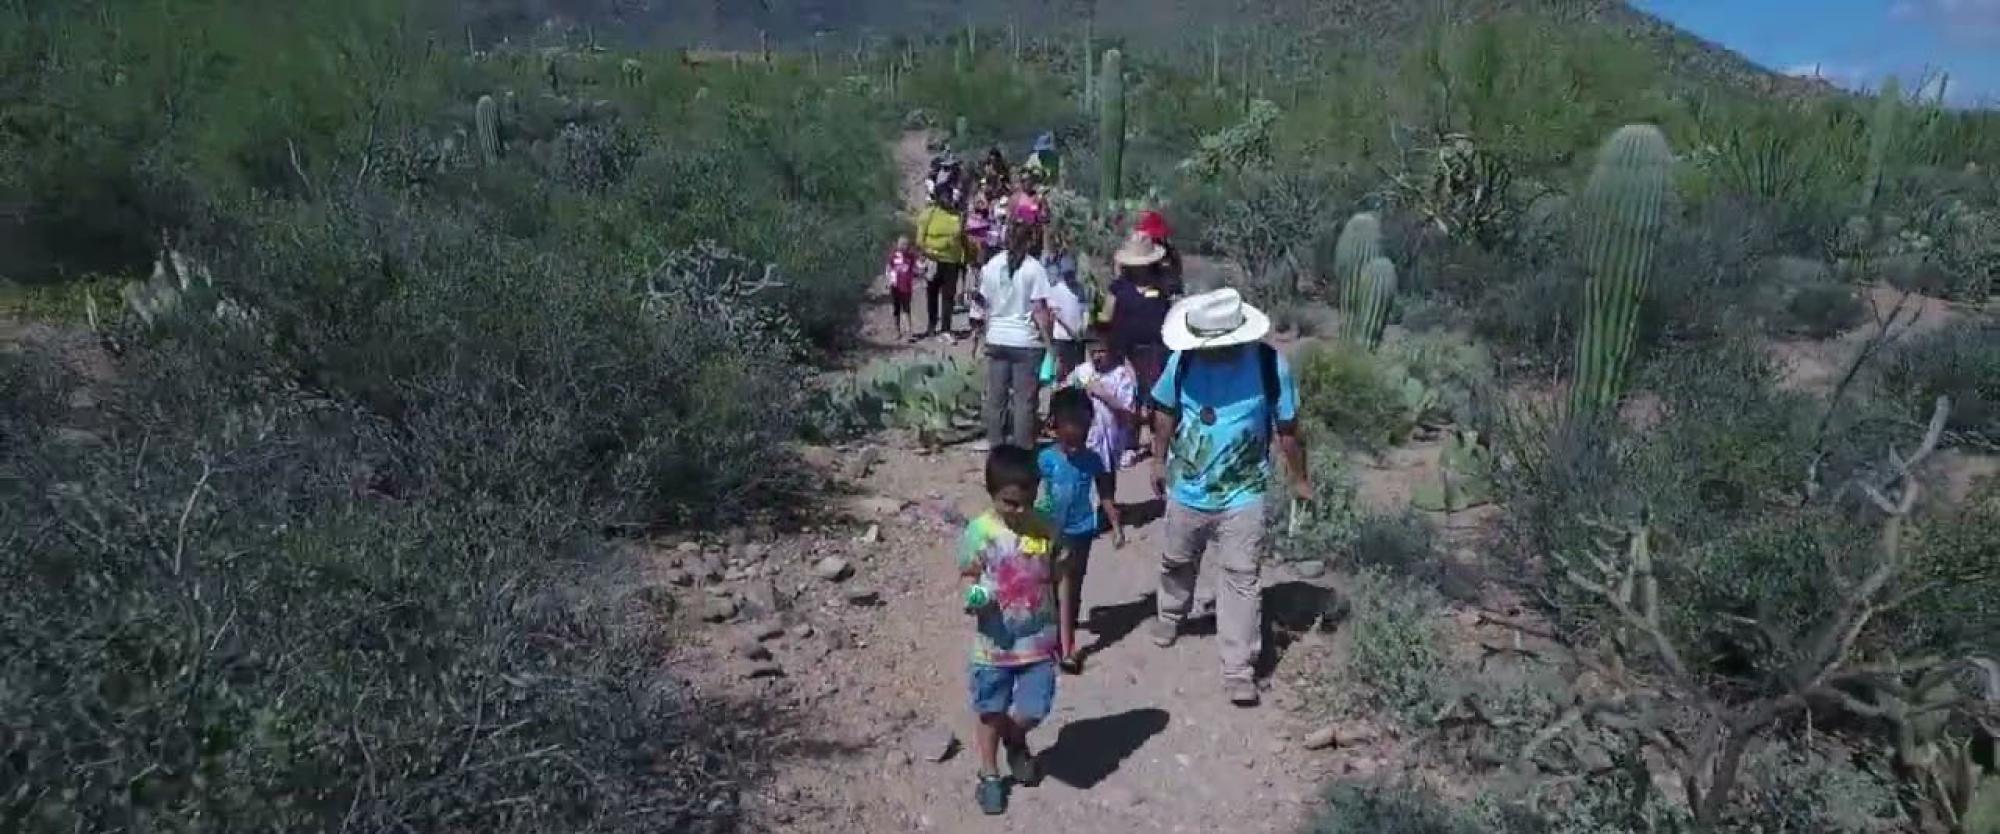 aerial footage of the desert with kids and adults walking a trail